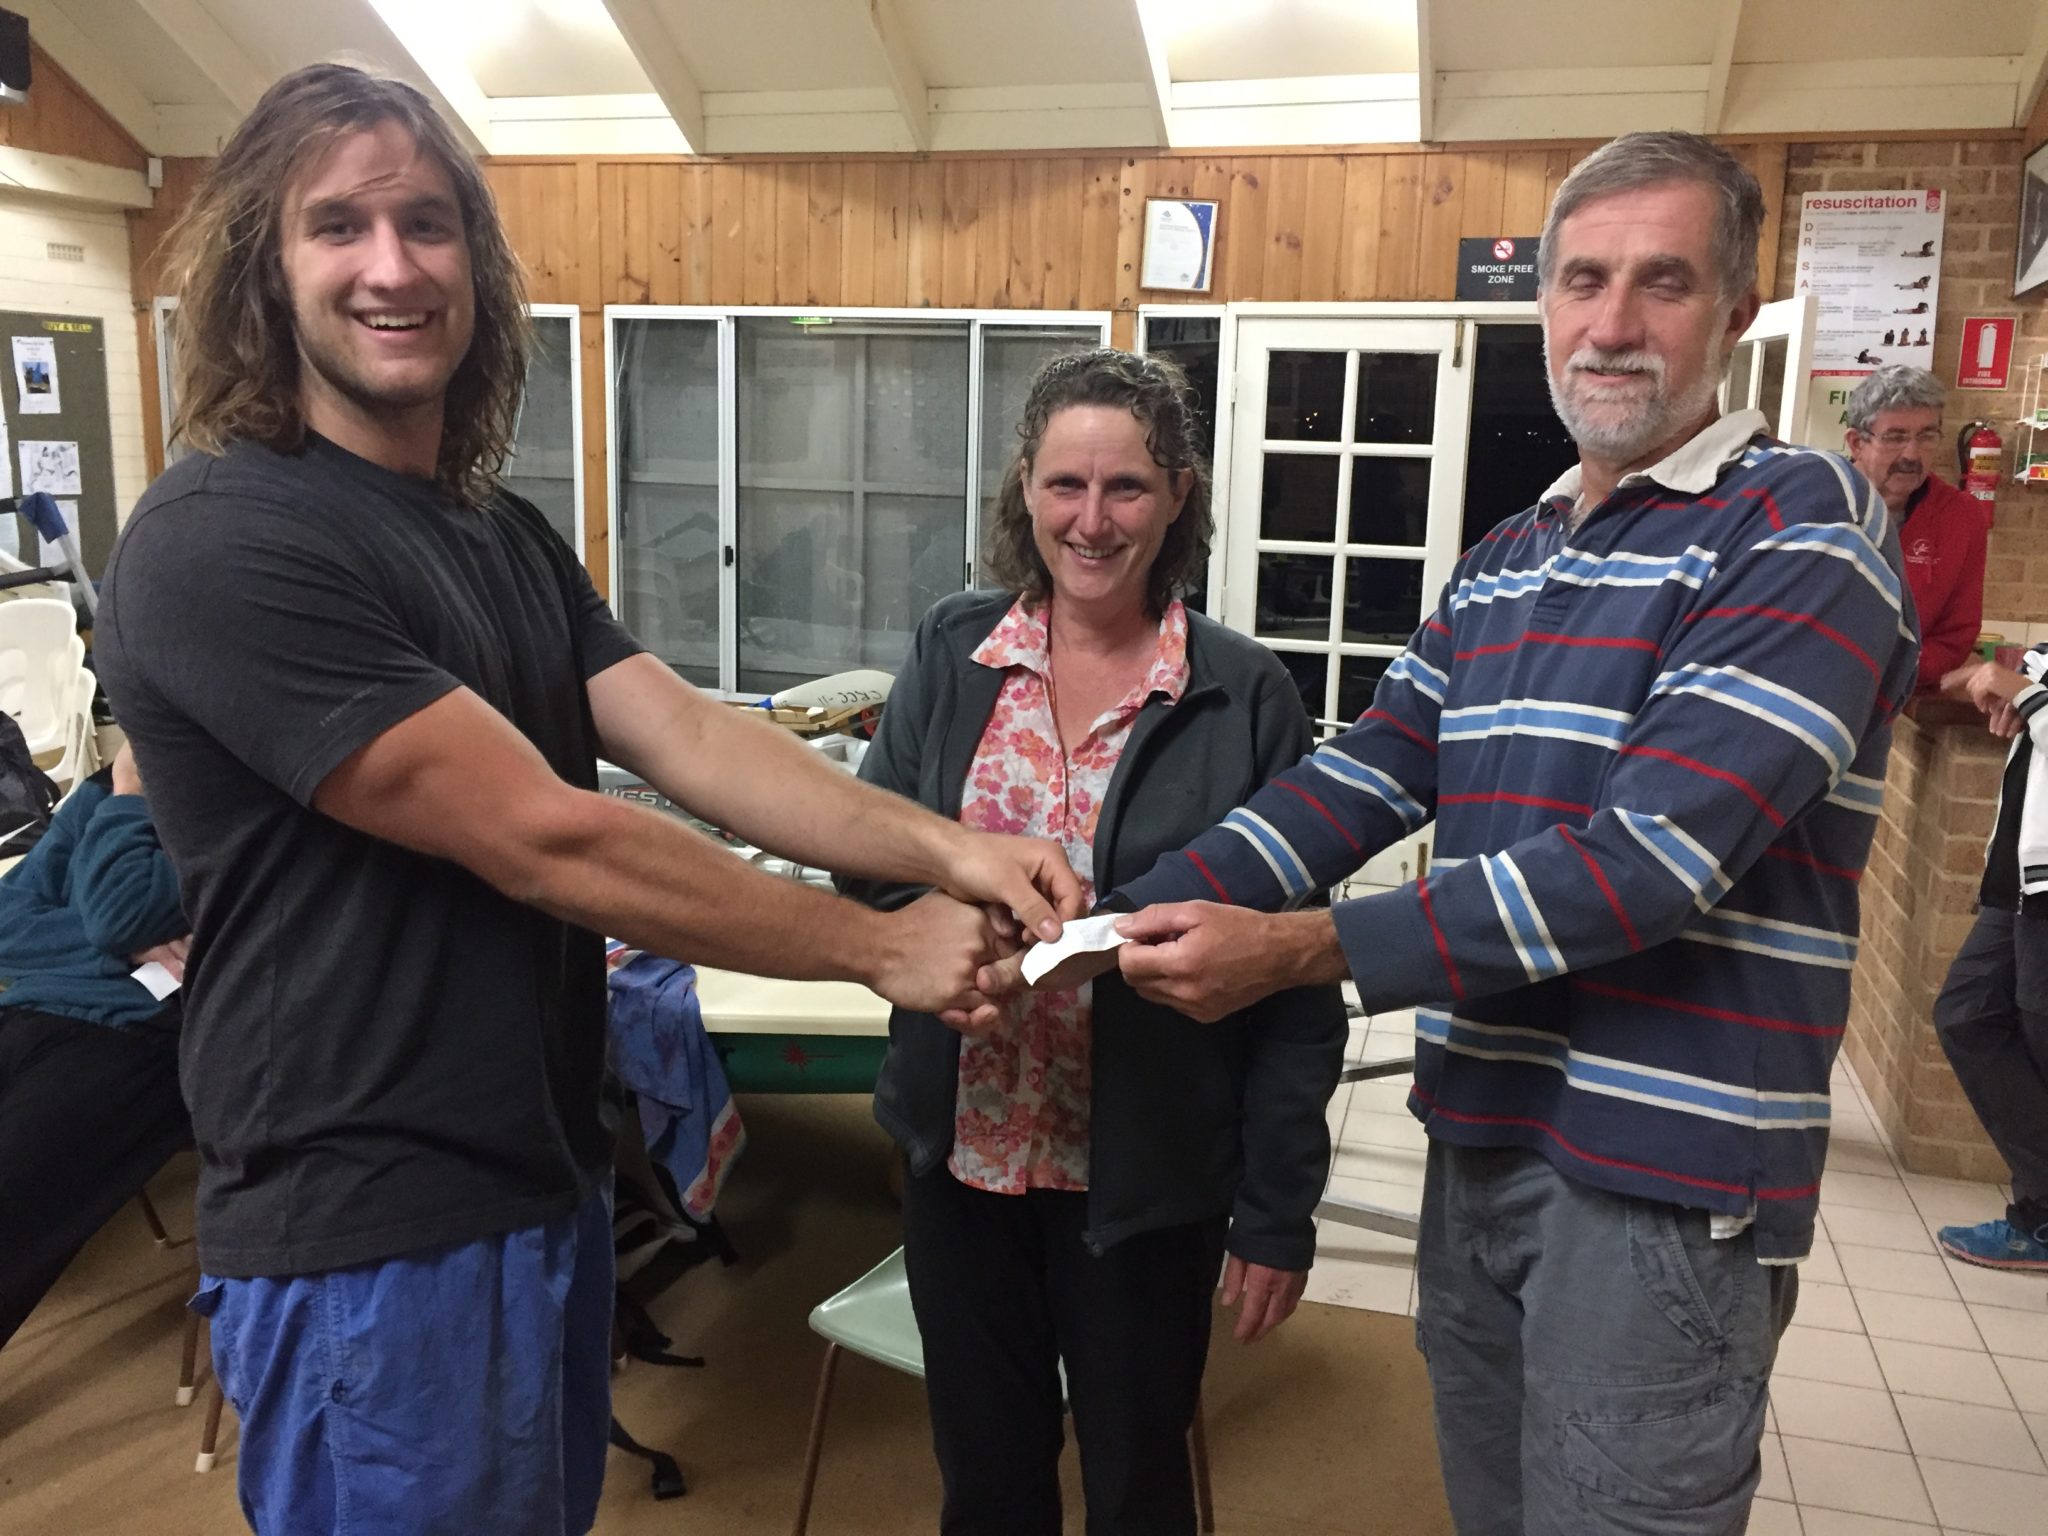 Tues 27th June 2017 : Tonights photo shows Club Member Tim Coward presenting his folks with movie vouchers